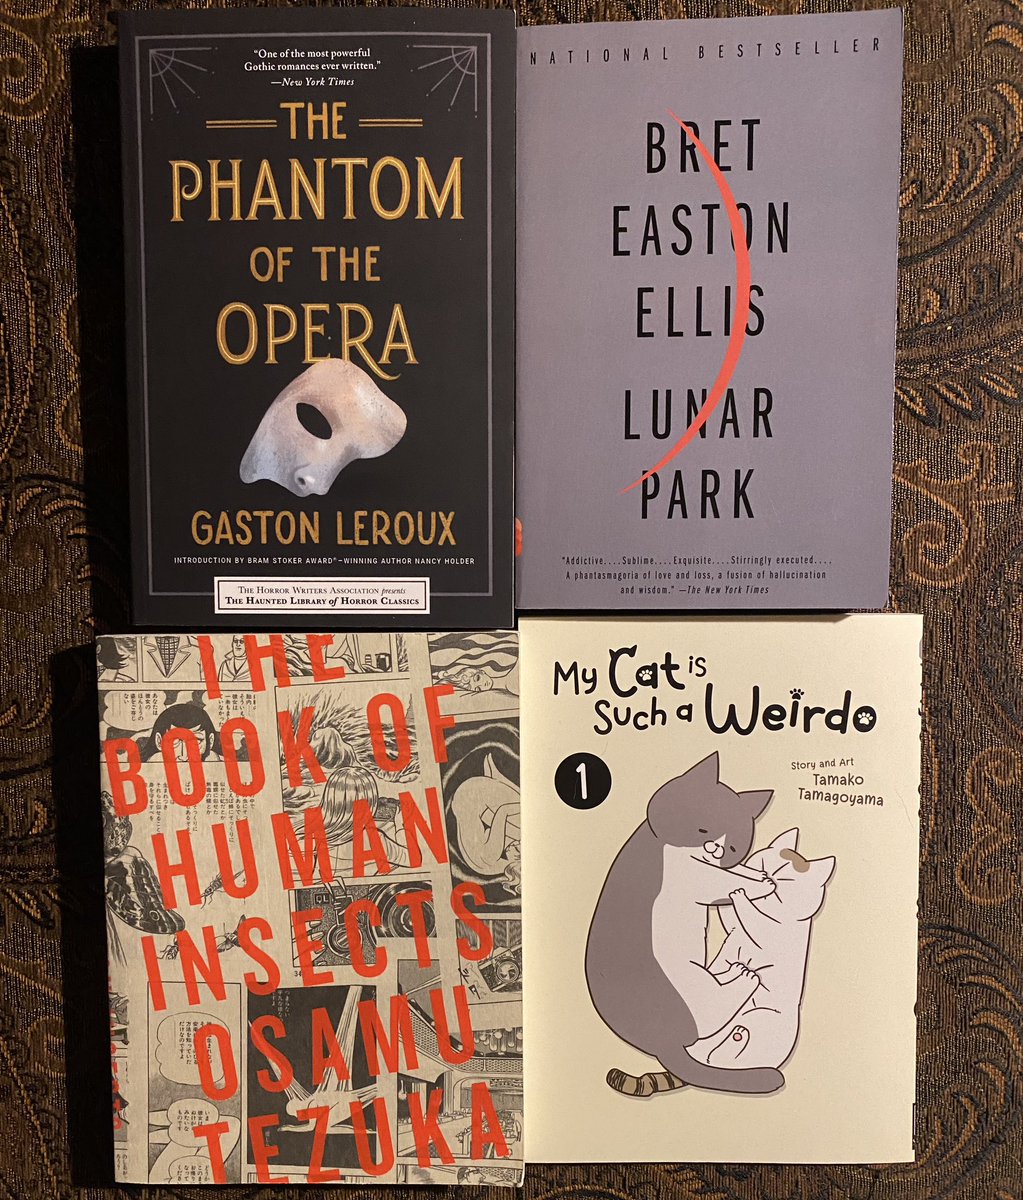 Here’s tonight’s haul…

“Phantom of the Opera” by Gaston Leroux
“Lunar Park” by Bret Easton Ellis
“My Cat is Such a Weirdo” by Tamako
Tamagoyama
“The Book of Human Insects” by Osamu Tezuka

Two books and two manga. I had not seen this Tezuka book before!